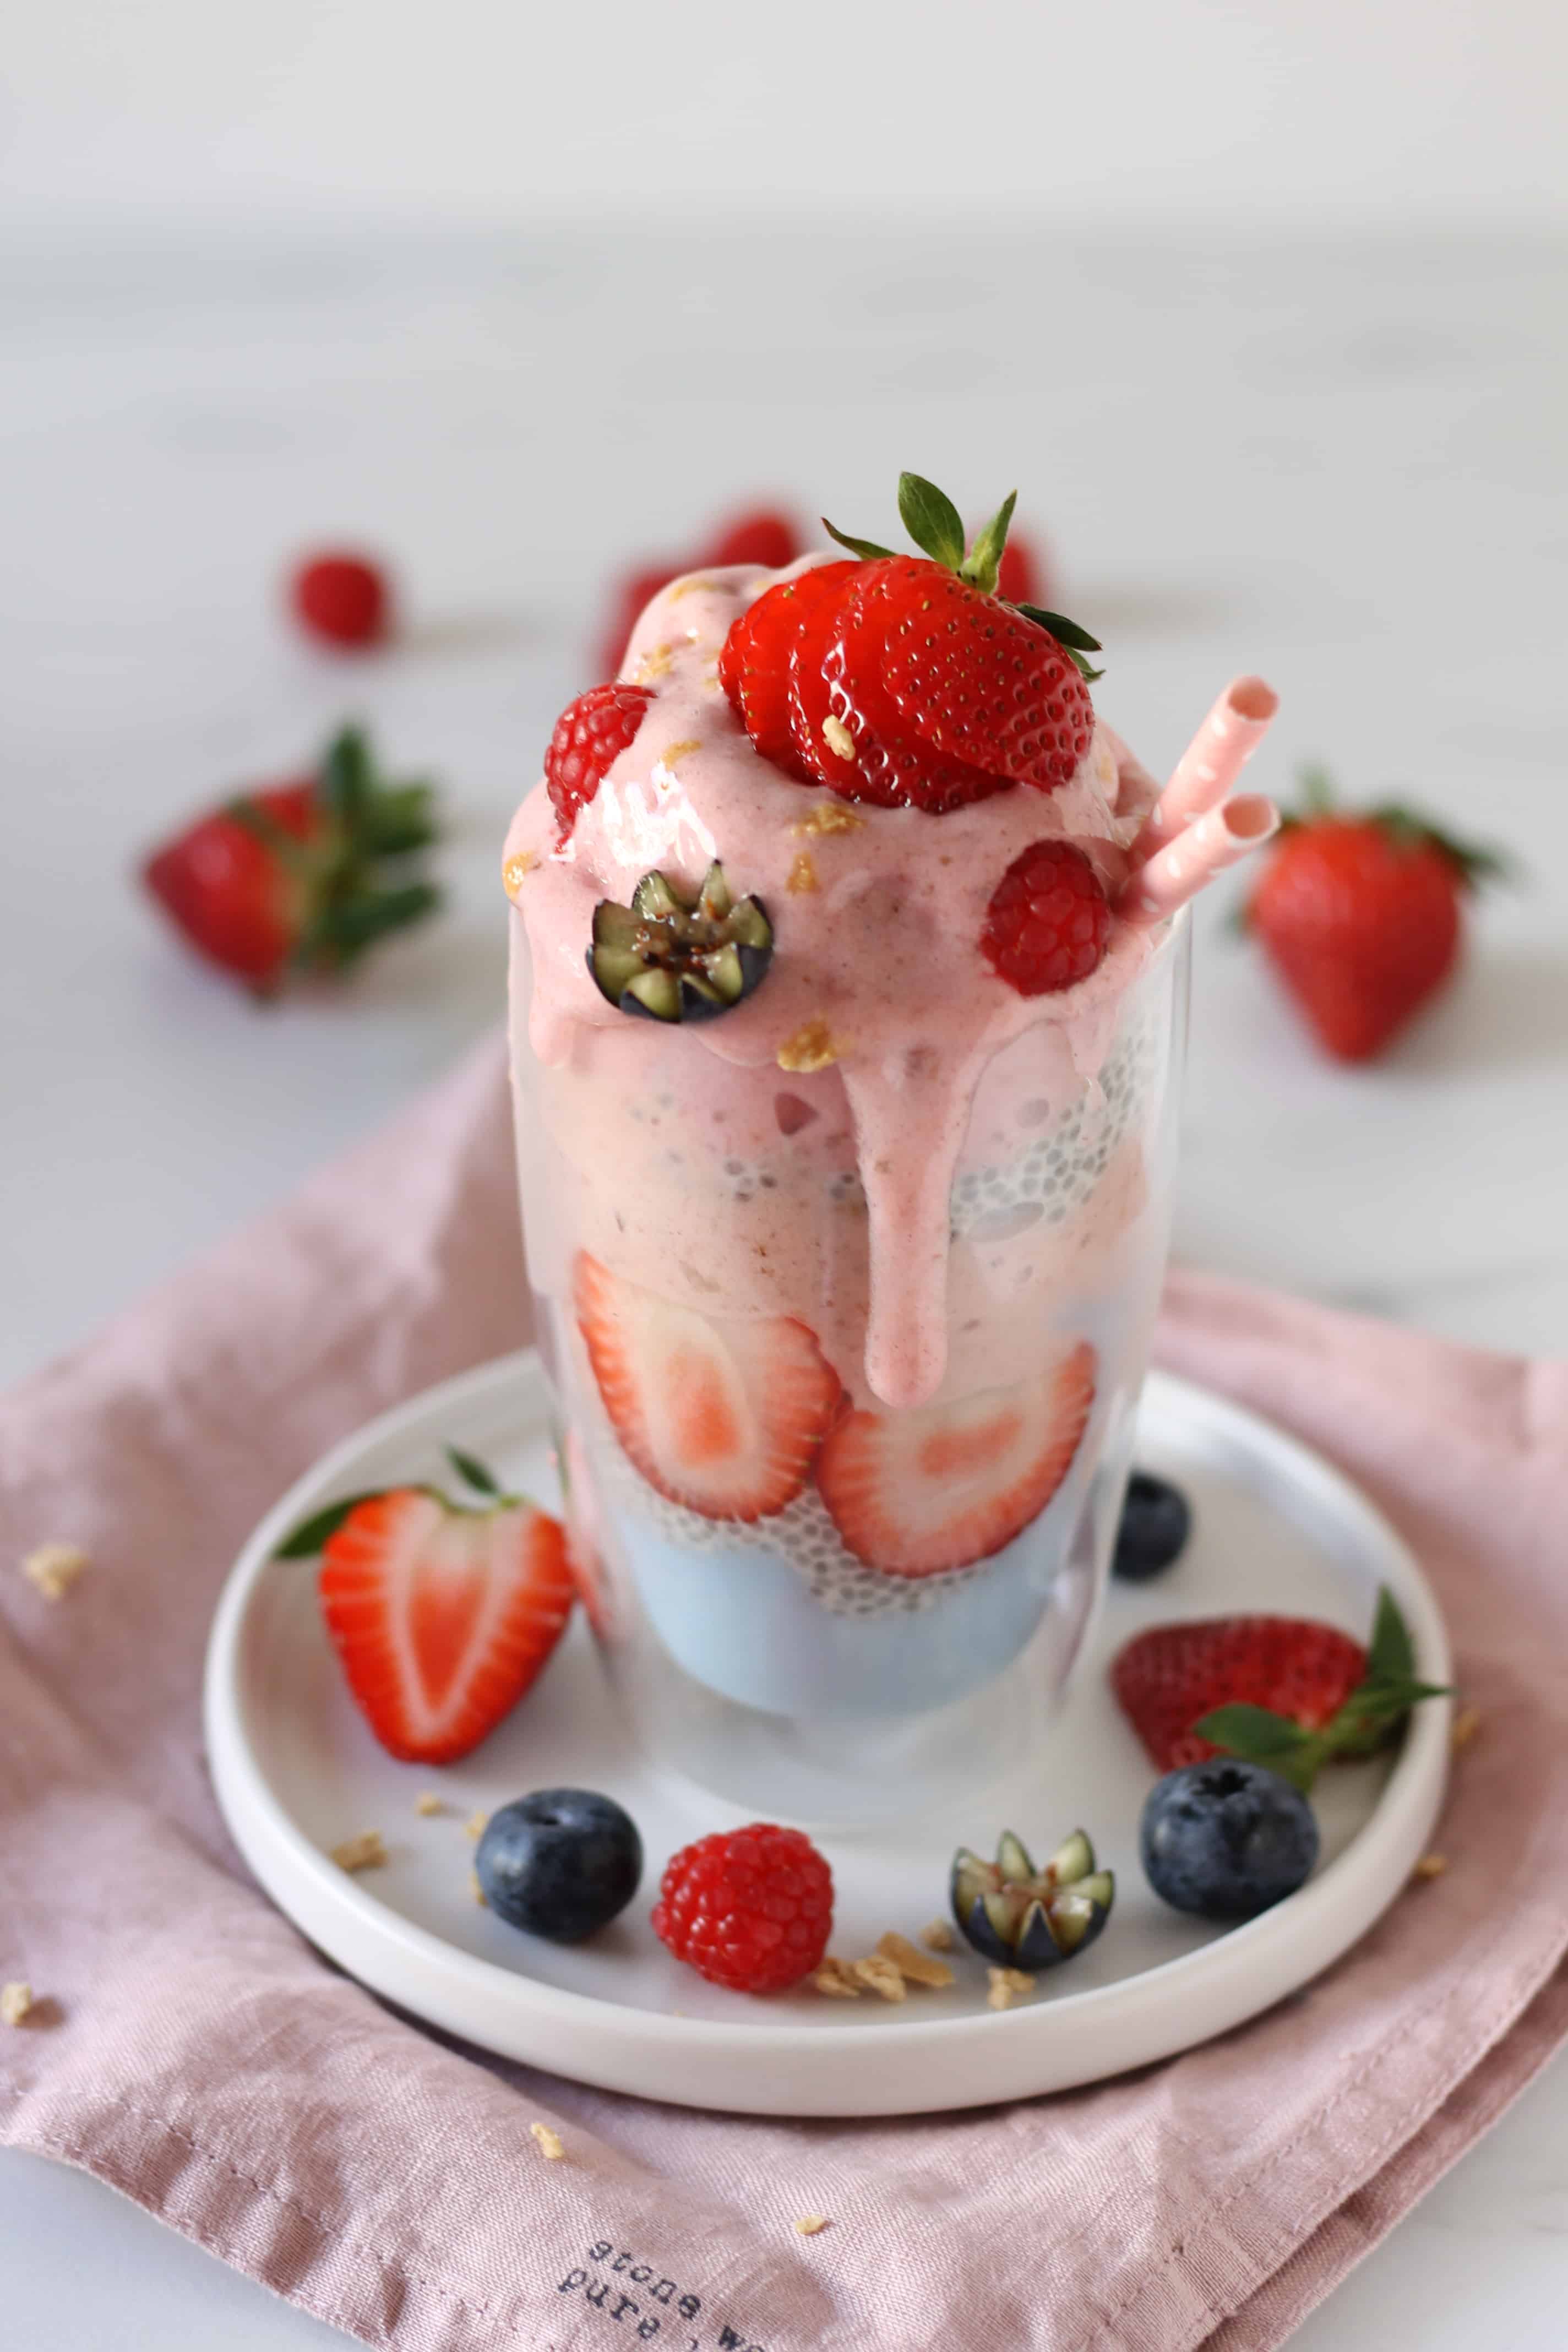 Add a touch of magic to your morning with this fairy nice cream parfait!